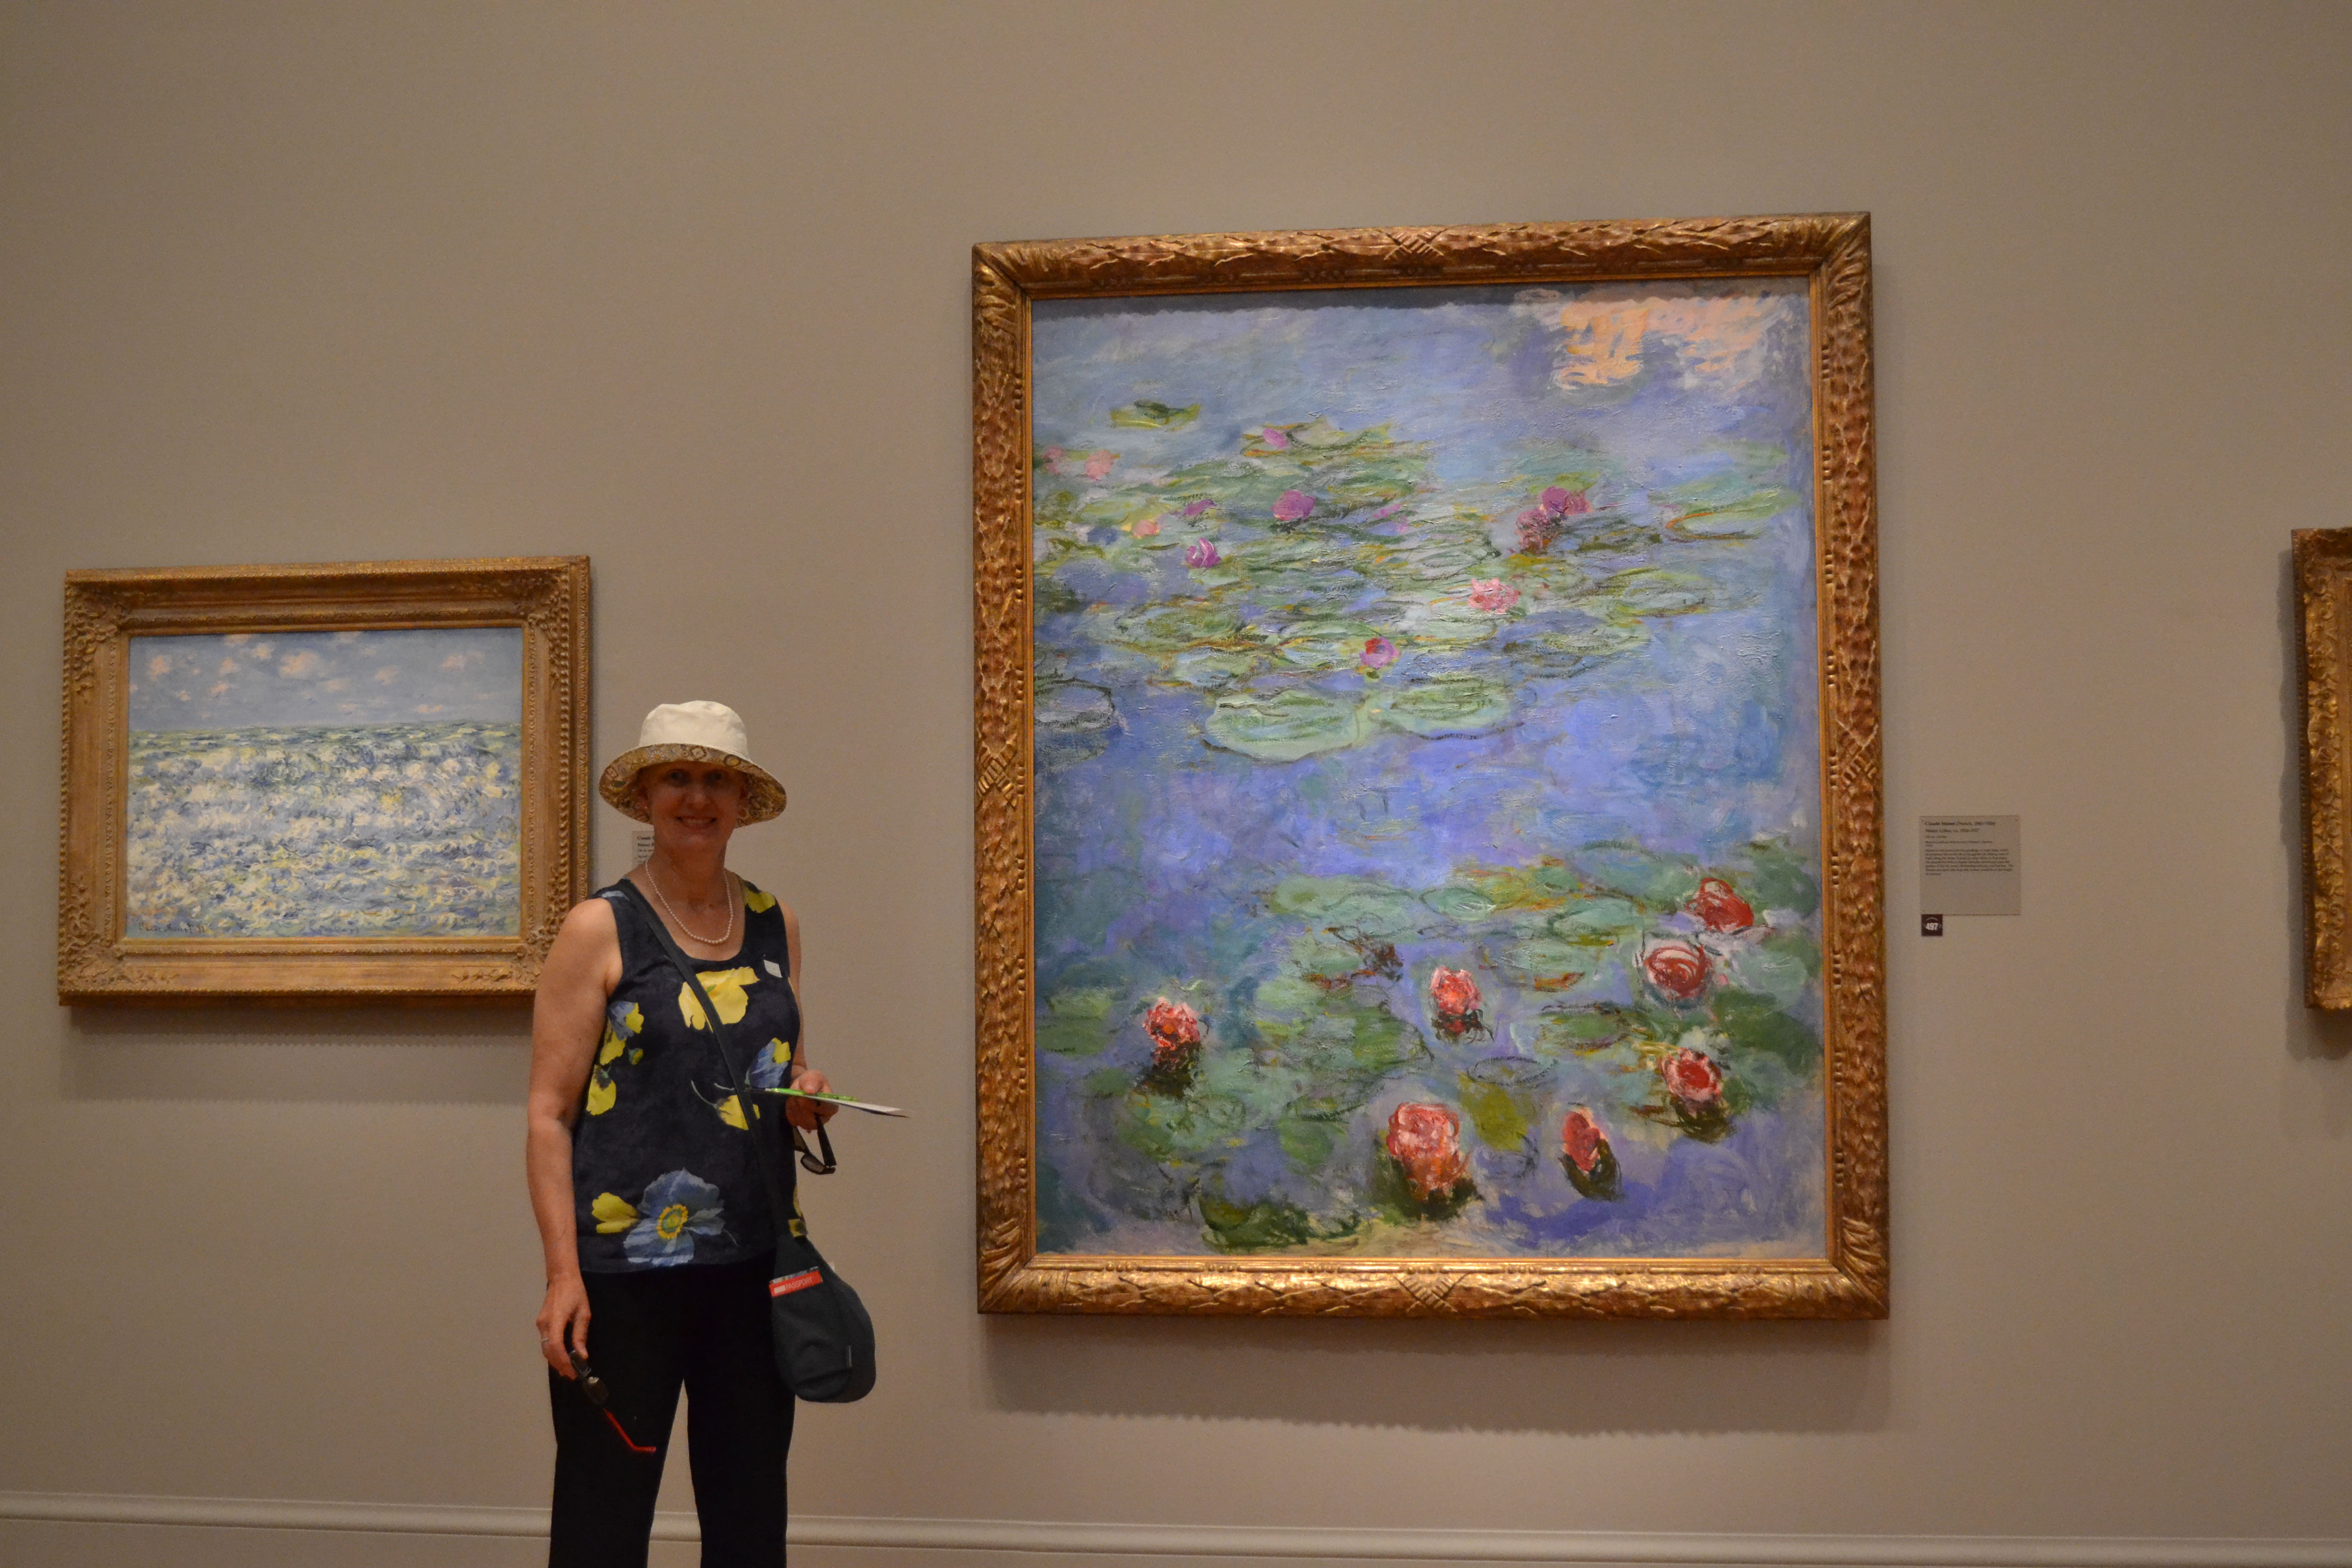 Mum with the Monet